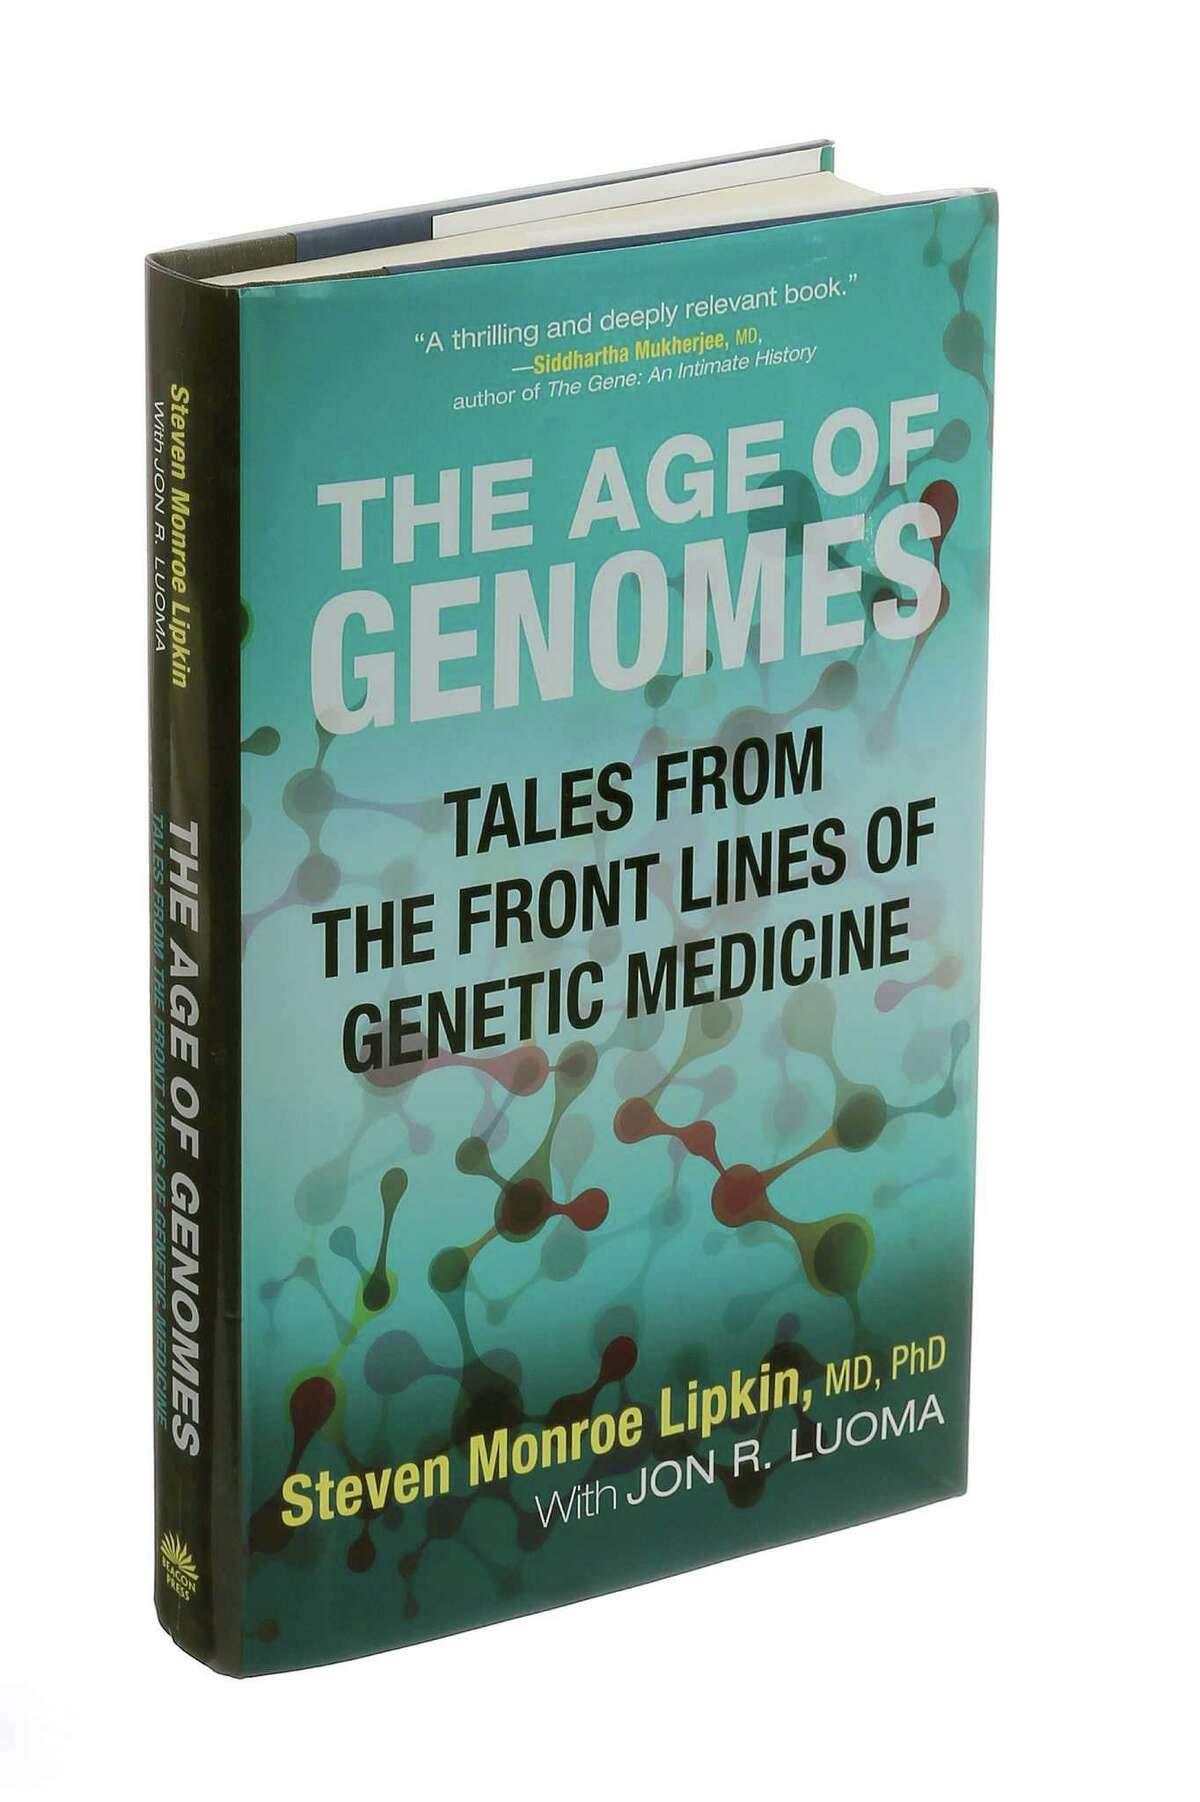 The book "The Age of Genomes: Tales from the Front Lines of Genetic Medicine" by Steven Monroe Lipkin with Jon R. Luoma, in New York, May 8, 2016. Lipkin, a clinical geneticist, reveals the modern revolution in genomics in part through the stories of his patients. (Patricia Wall/The New York Times)